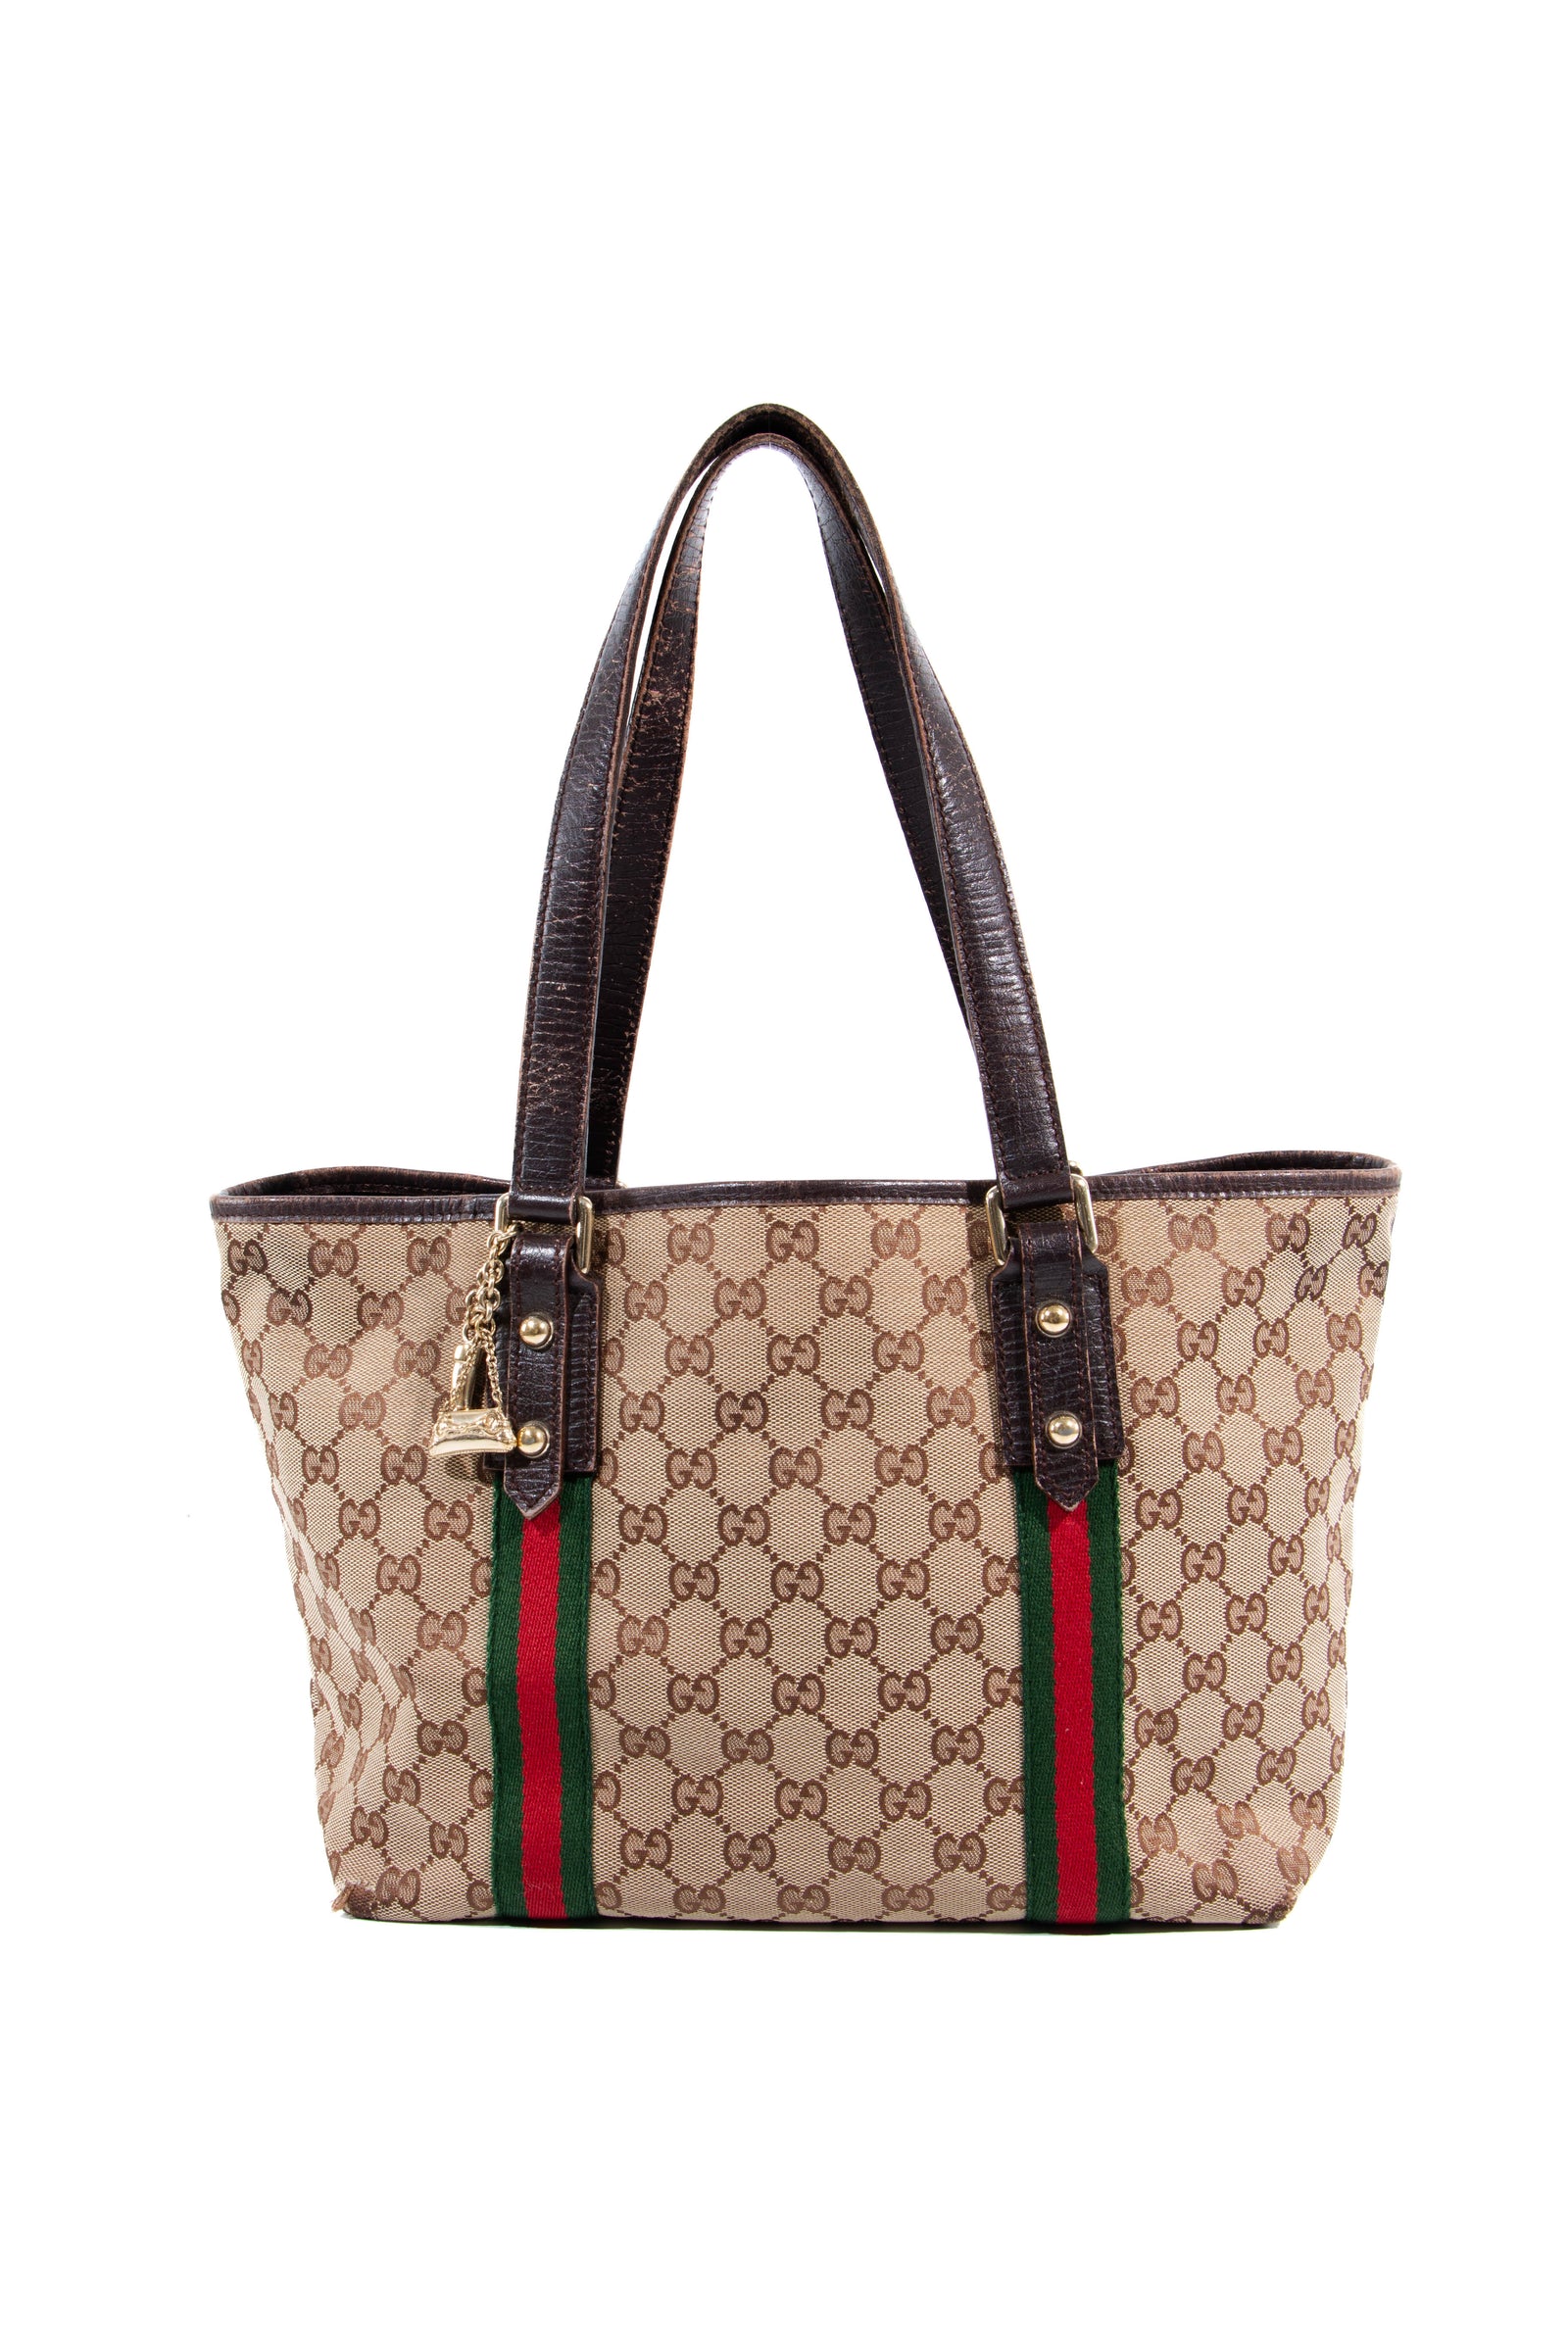 Cutie branded bags & Shirt by Nympa - GUCCI CHEST BAG PM FOR DETAILS